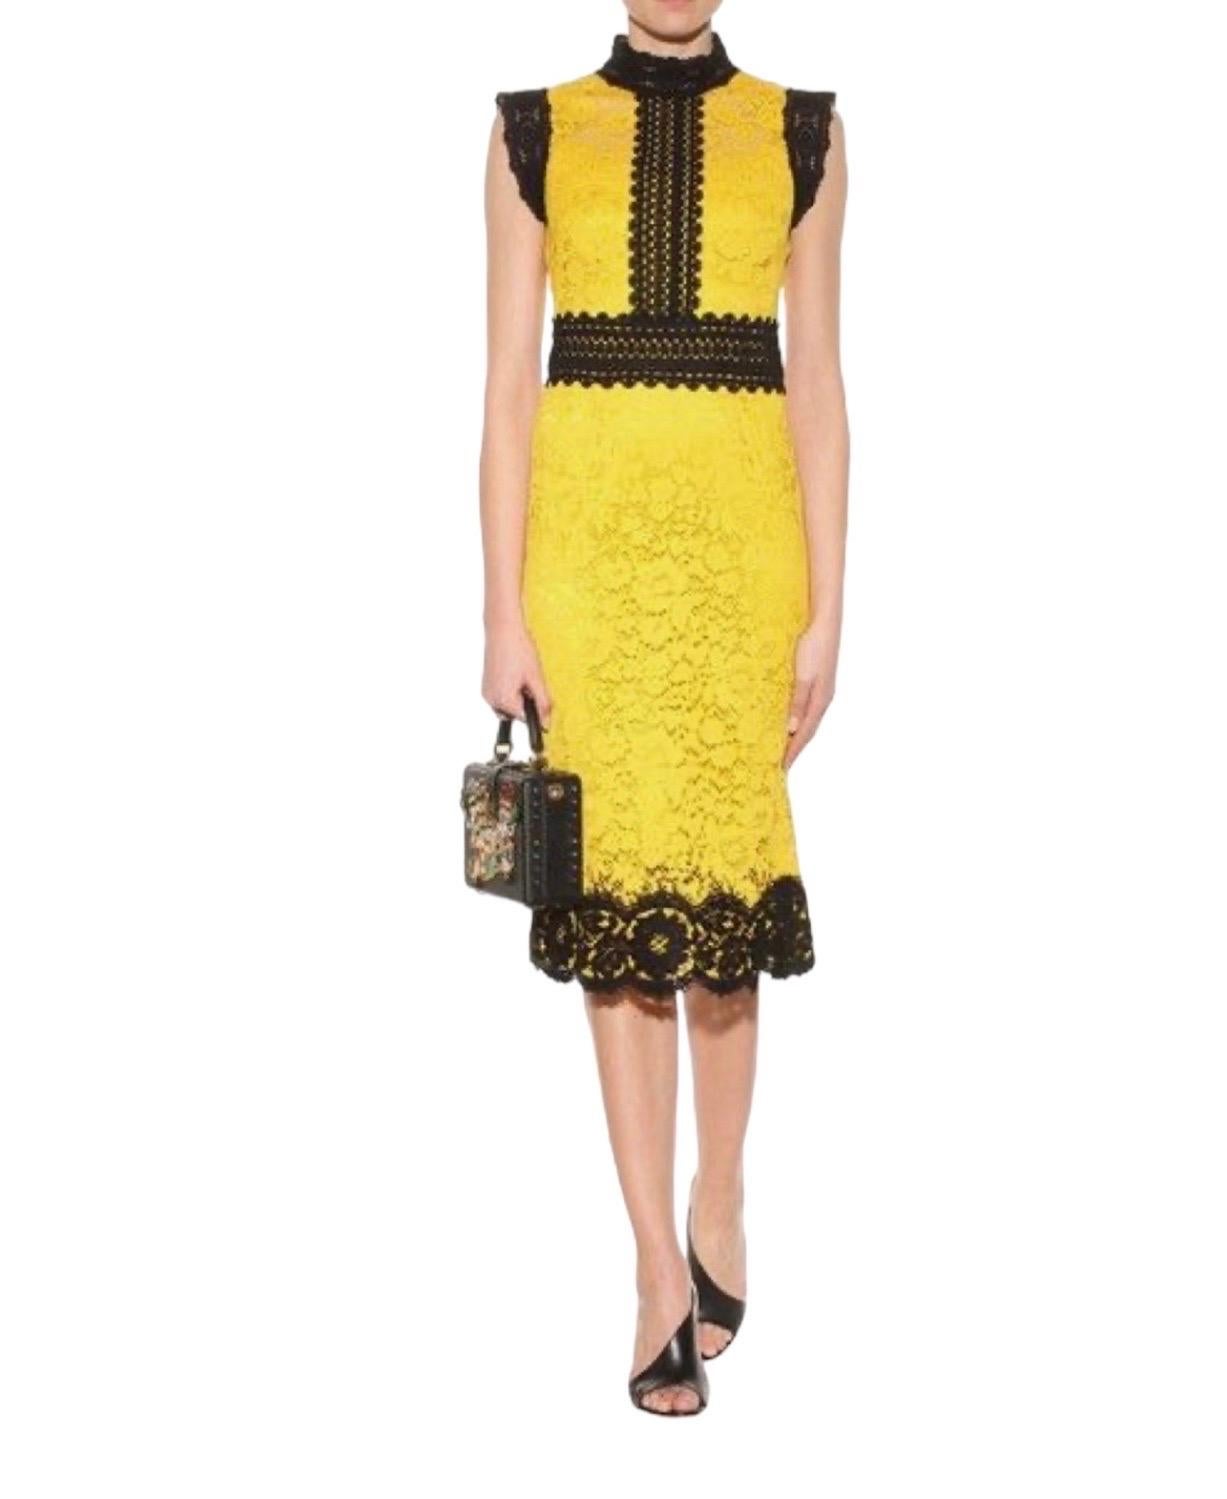 UNWORN Dolce & Gabbana Yellow & Black Guipure Lace Evening Cocktail Dress 40 For Sale 6